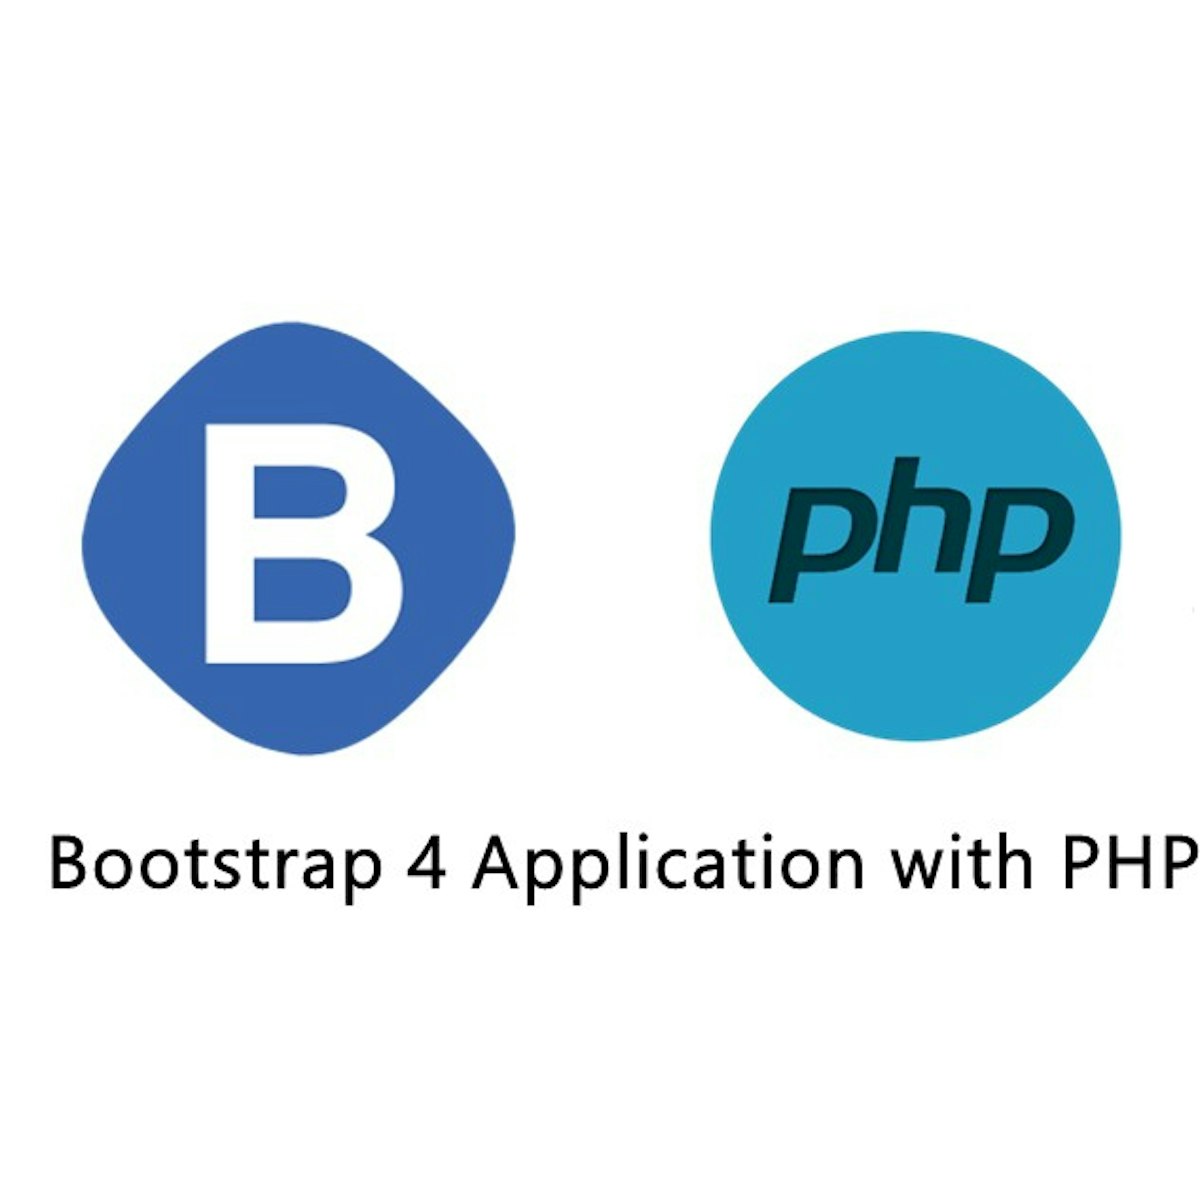 featured image - Bootstrap 4 Application with PHP